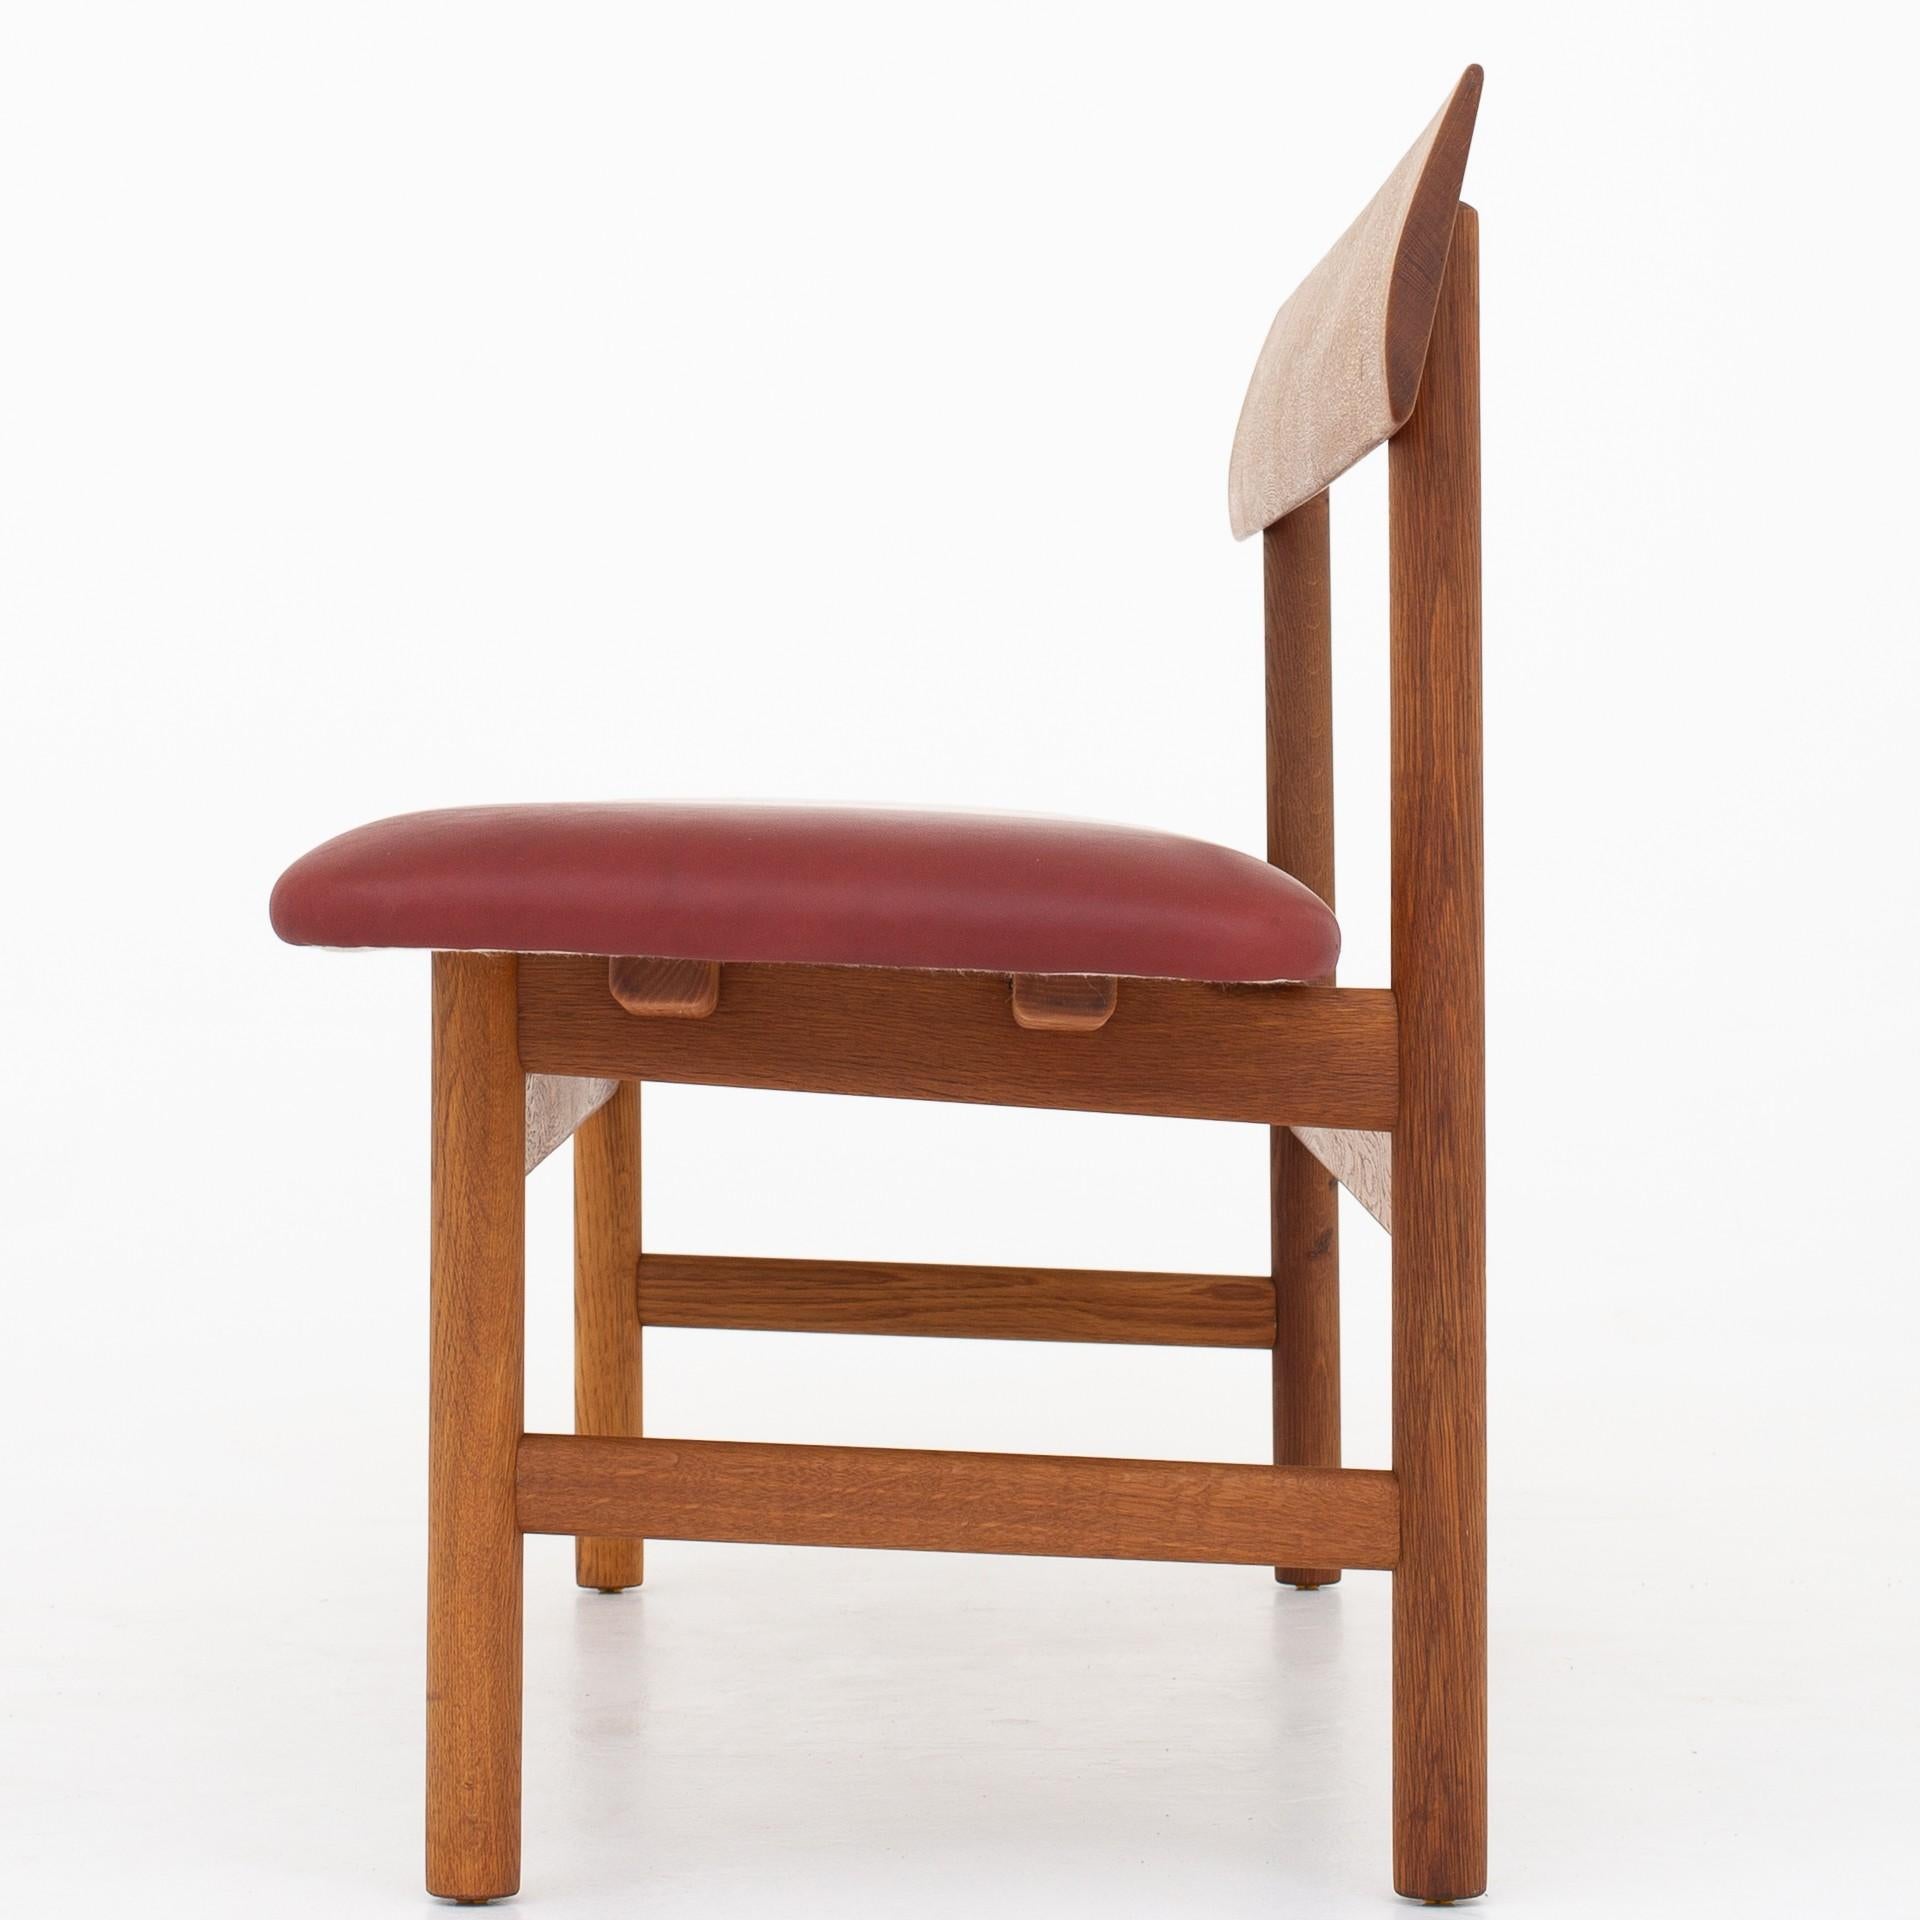 BM 3171, bench in patinated oak with new seat in Elegance Indian red leather. Maker Fredericia Furniture.